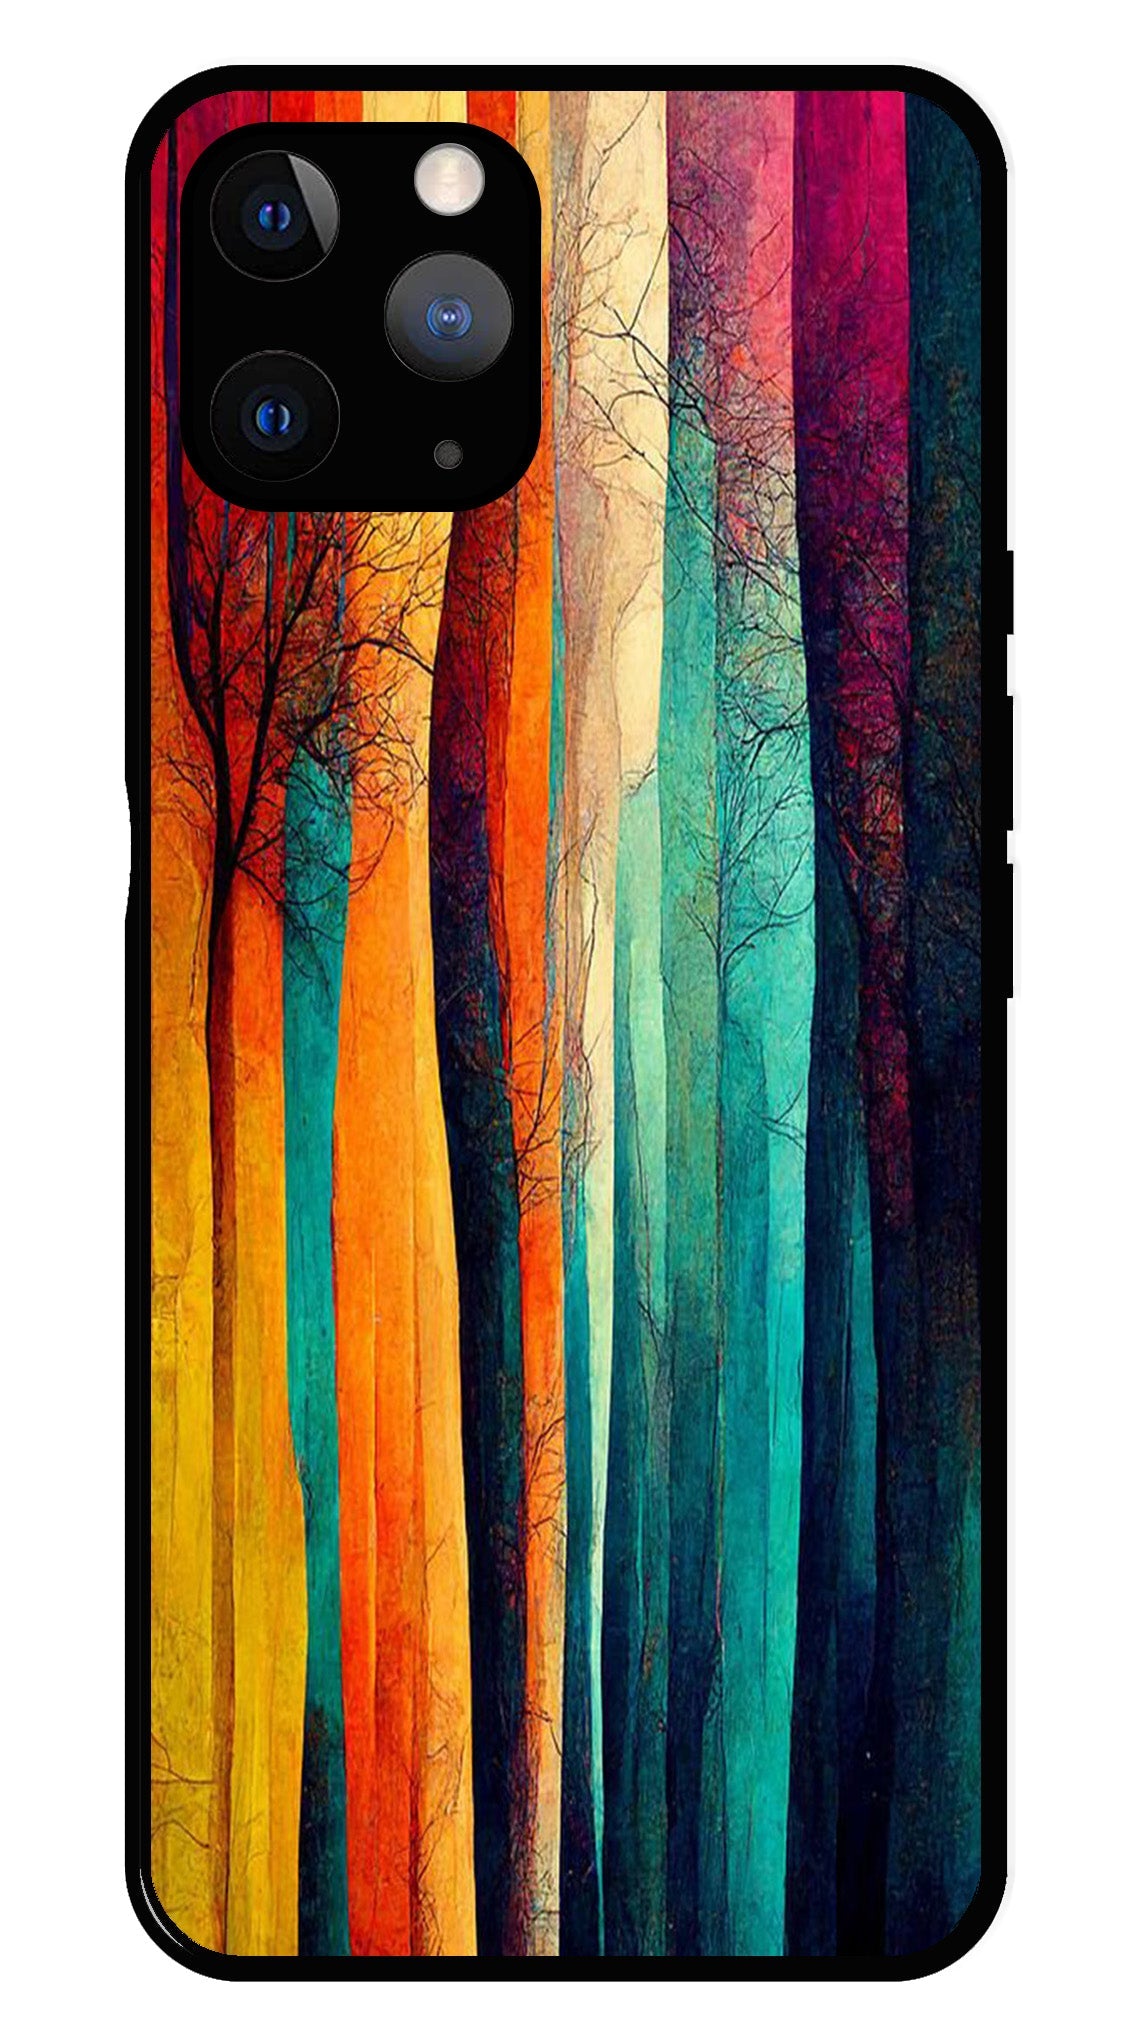 Modern Art Colorful Metal Mobile Case for iPhone 11 Pro Max